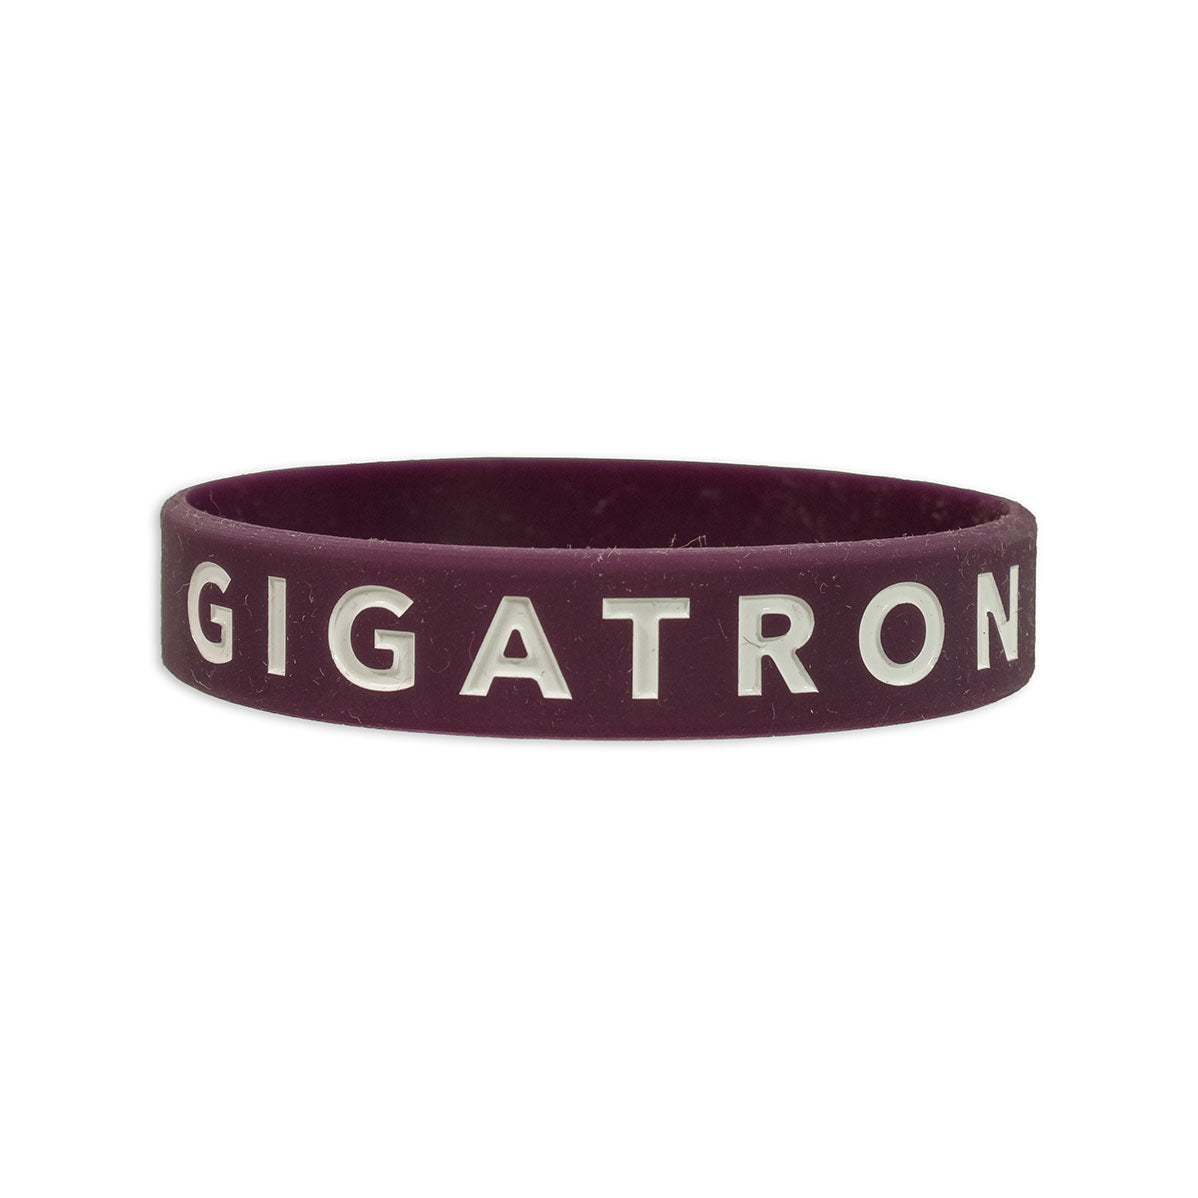 Aggieland Outfitters Gigatron Youth Silicon Bracelet